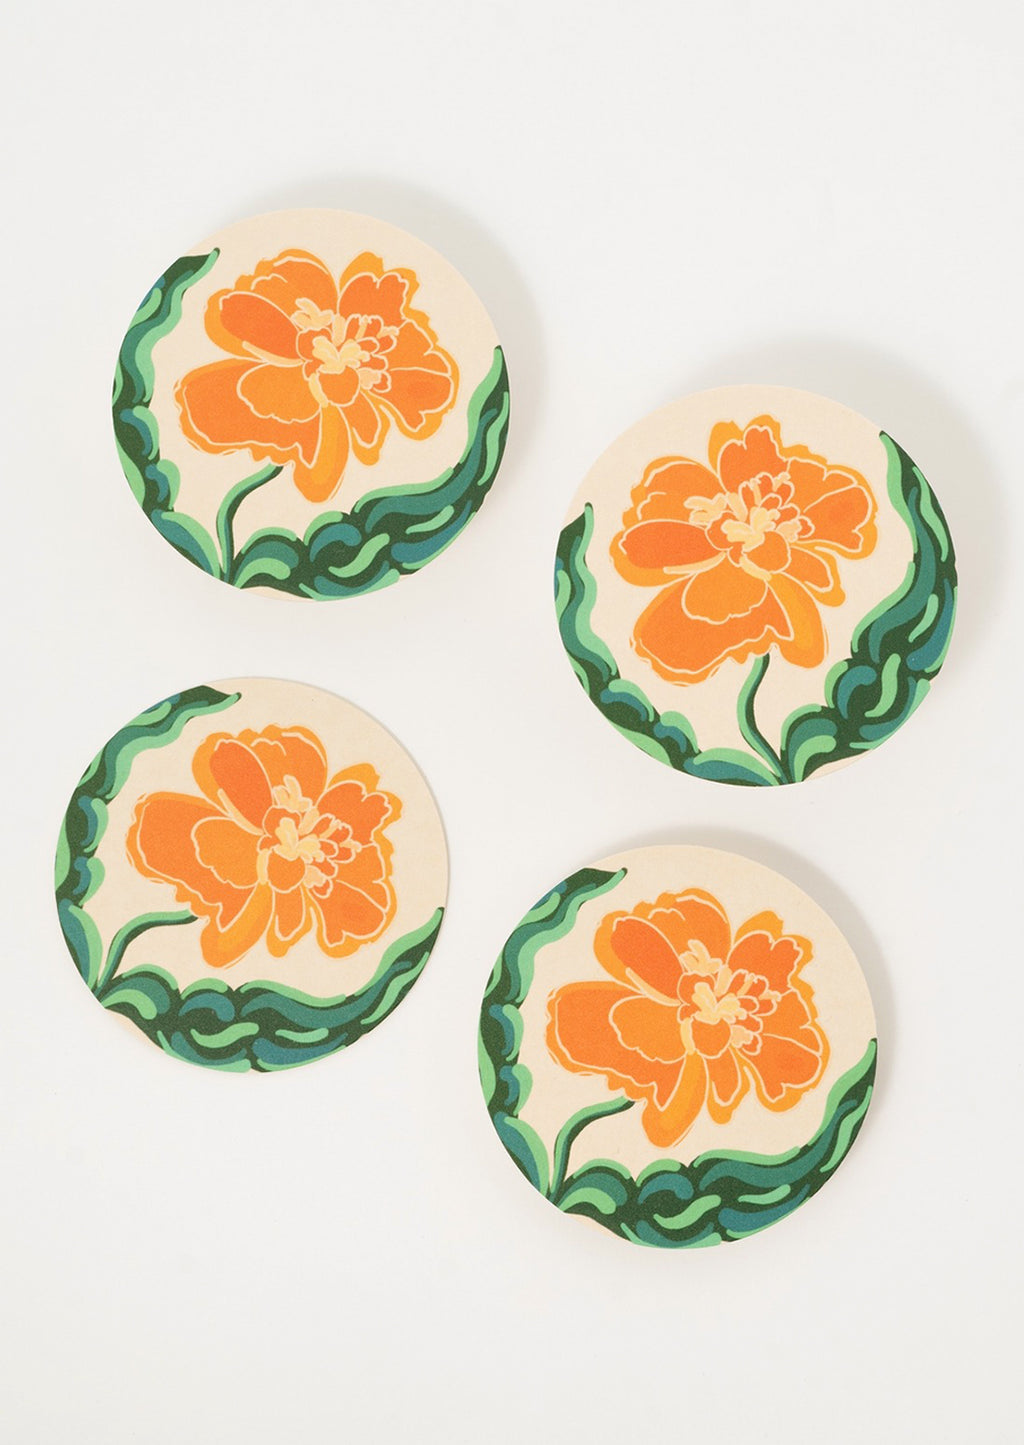 Marigold: Paper coasters with marigold print.